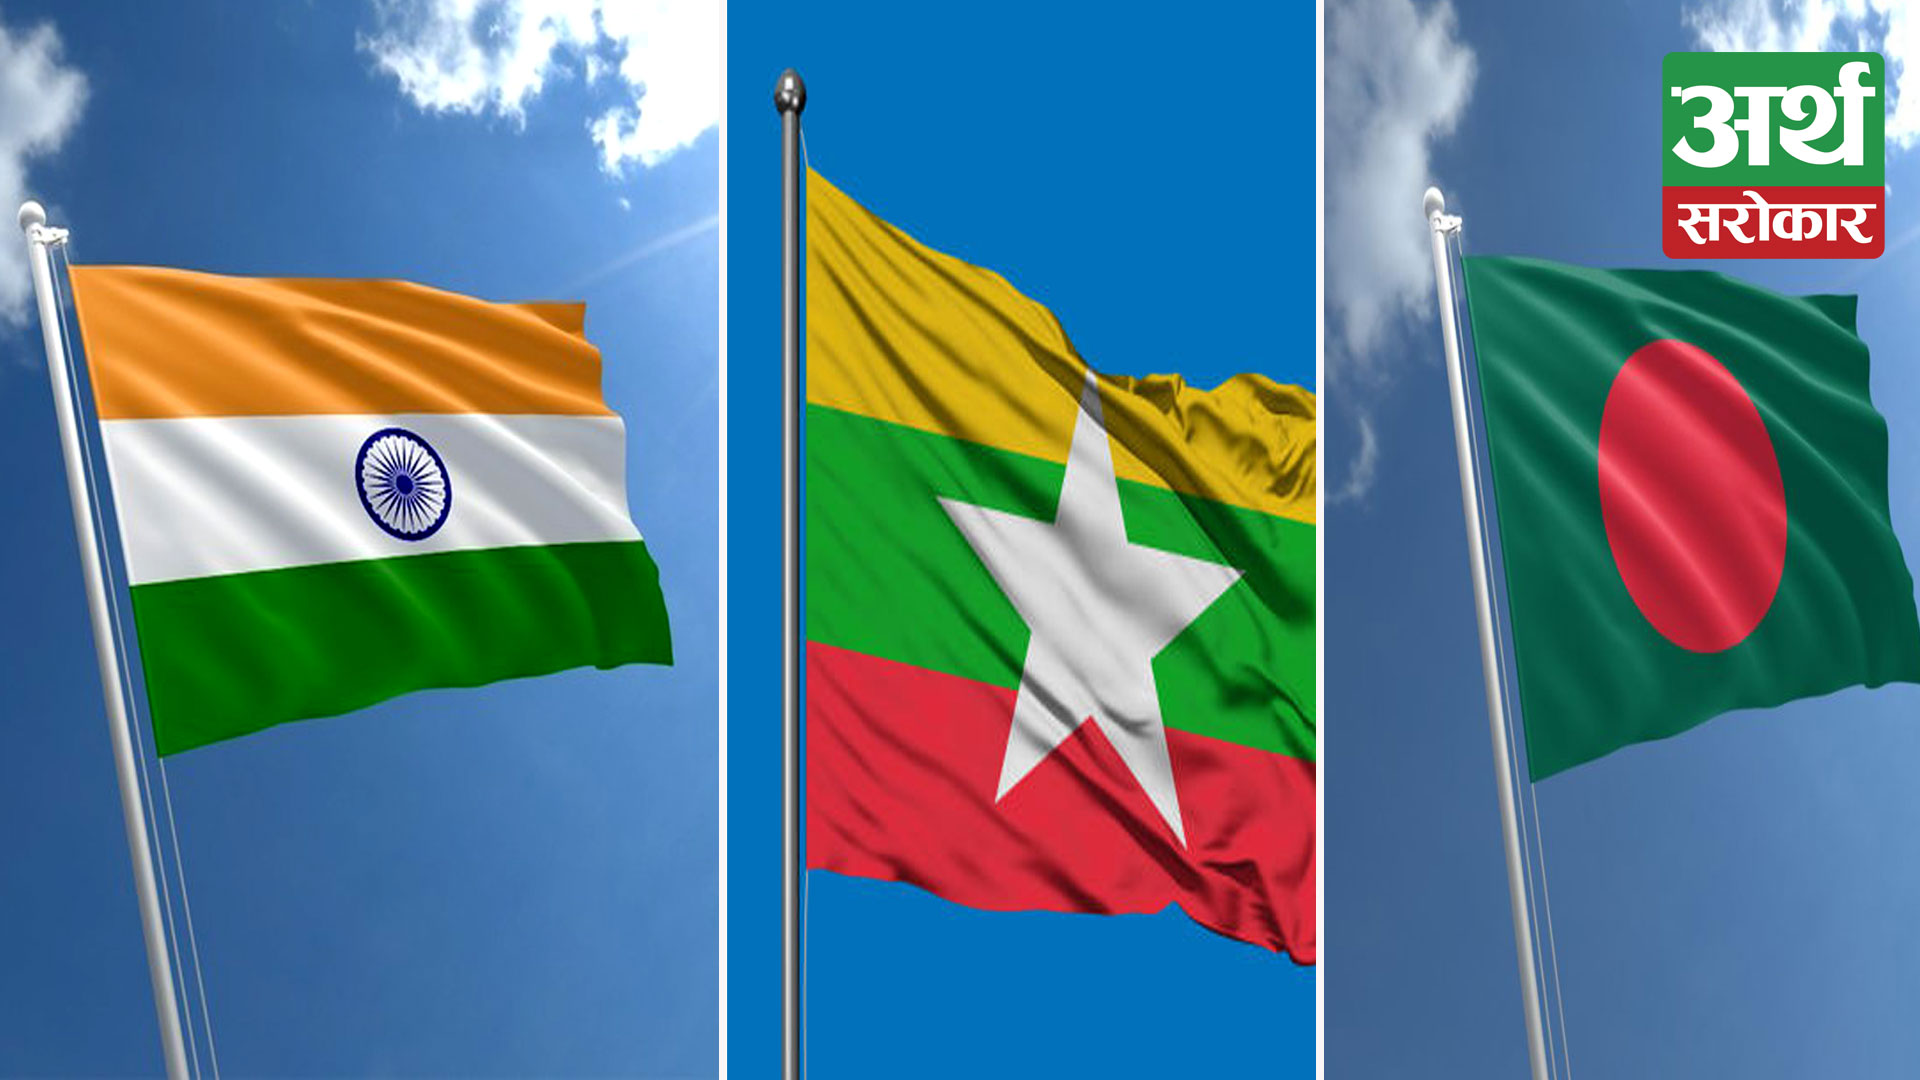 Why India, Myanmar, Bangladesh need to pursue ‘trilateral cooperation’ strategy?